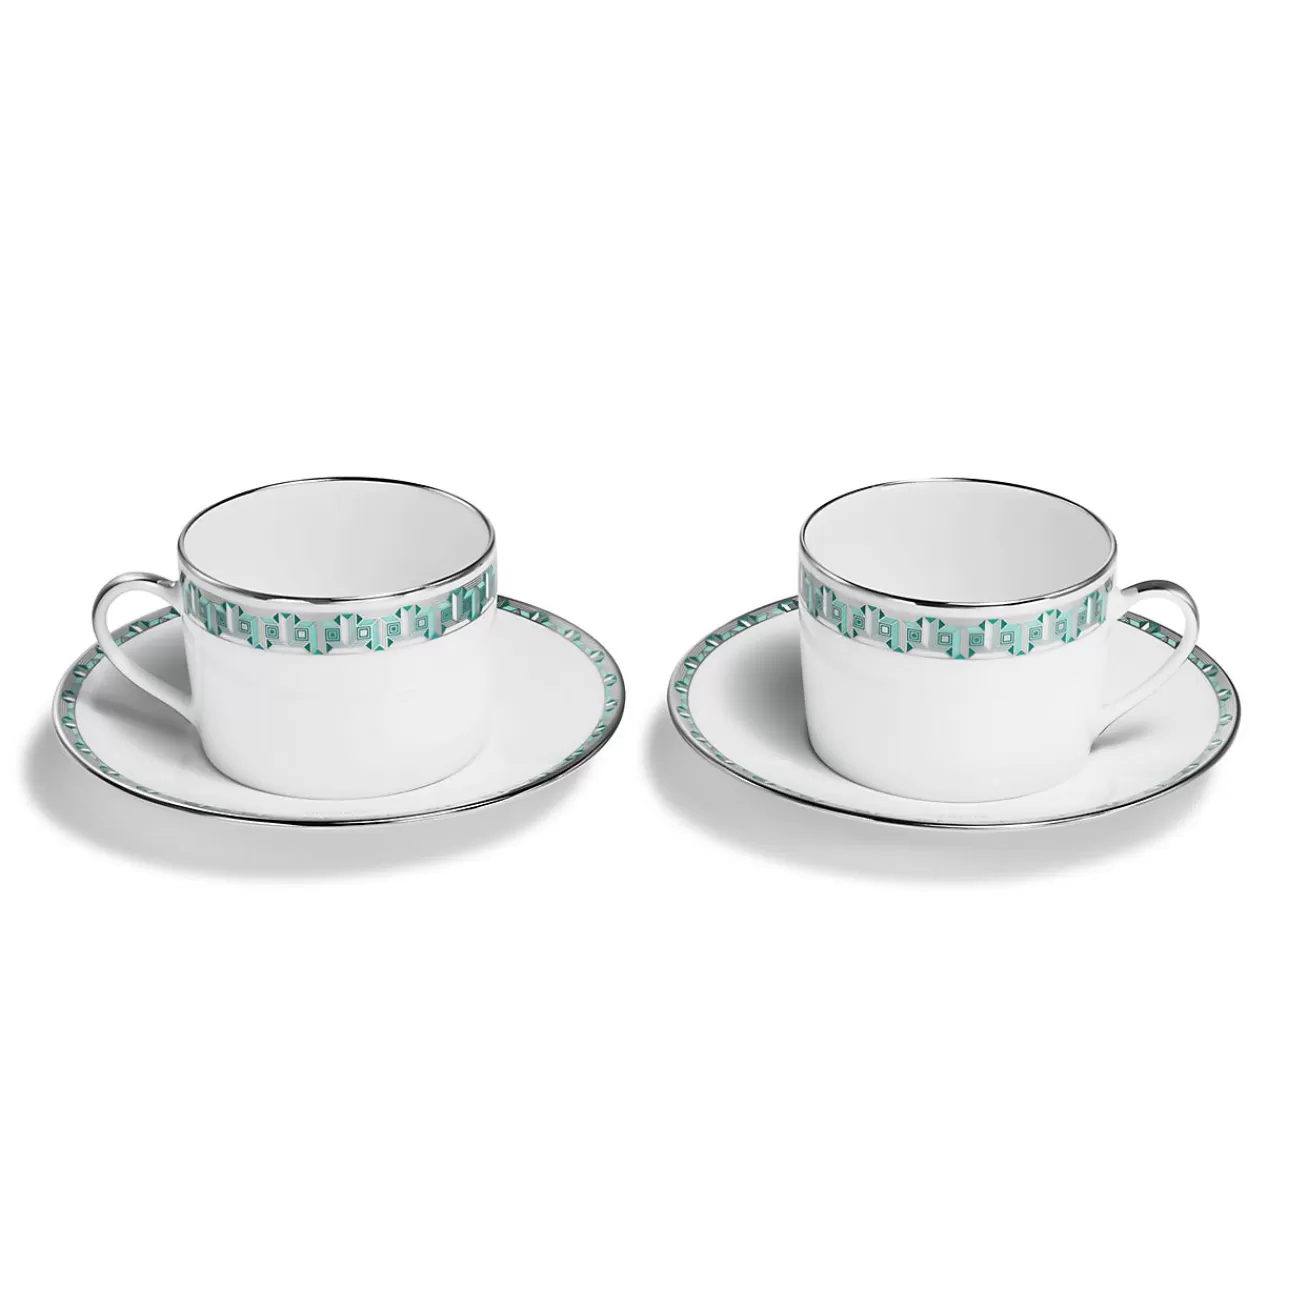 Tiffany & Co. Tiffany Blue Tiffany T True Cup and Saucer Set of Two, with Platinum Rims | ^ The Home | Housewarming Gifts